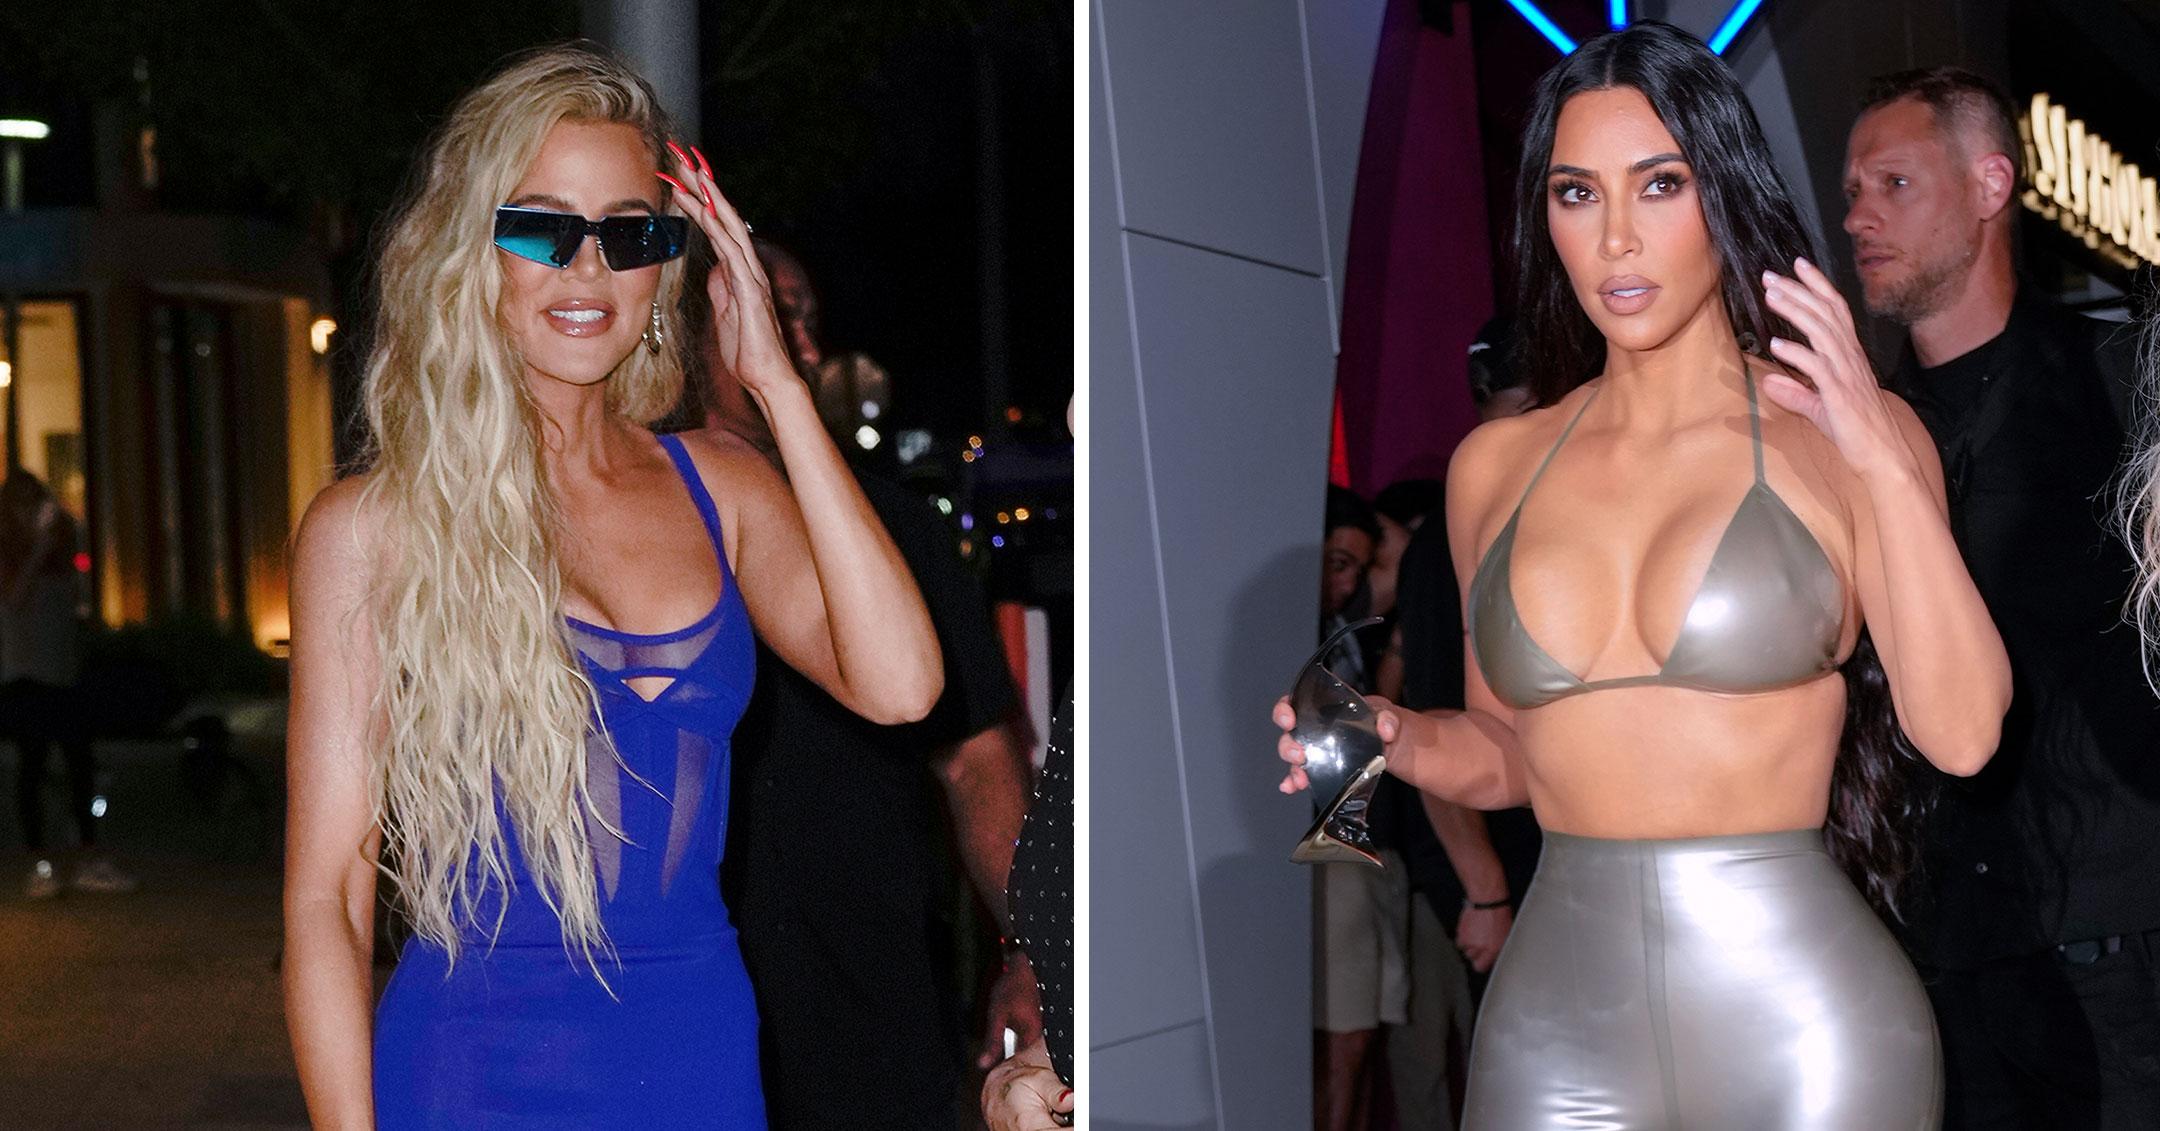 Kim Kardashian is Joined by Sister Khloe at SKIMS Pop-Up Shop